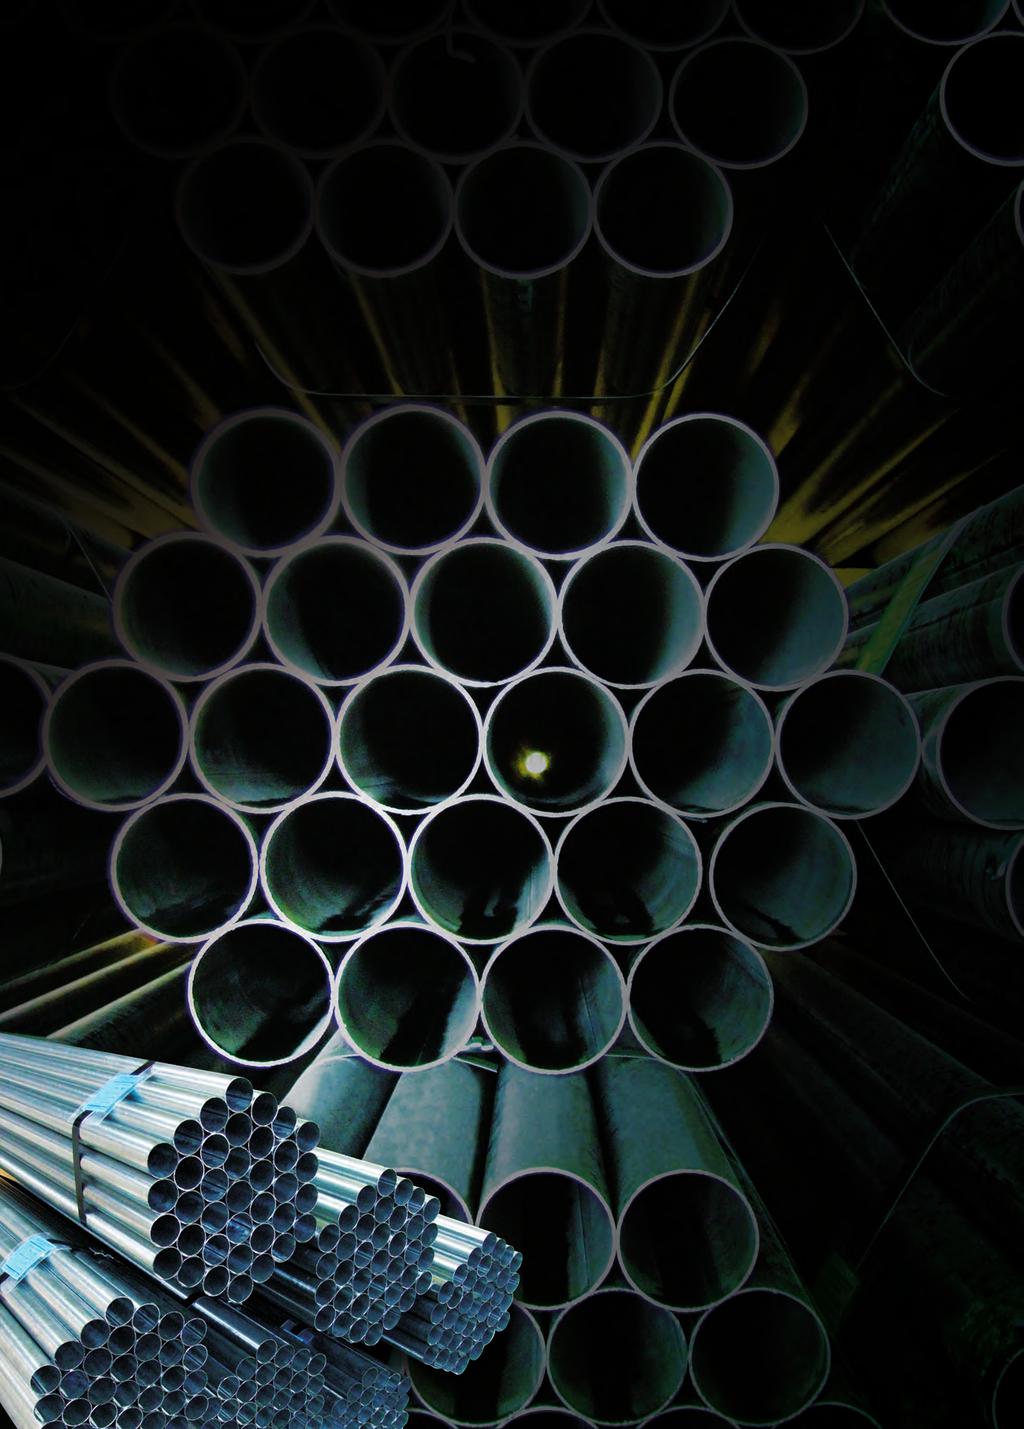 QATAR PRE-GALVANIZED TUBES/PIPES STRUCTURAL SOLUTIONS The Pre Galvanized Pipes made using qualitative steel are pre coated with zinc that further adds to the strength of the metal and its resistance